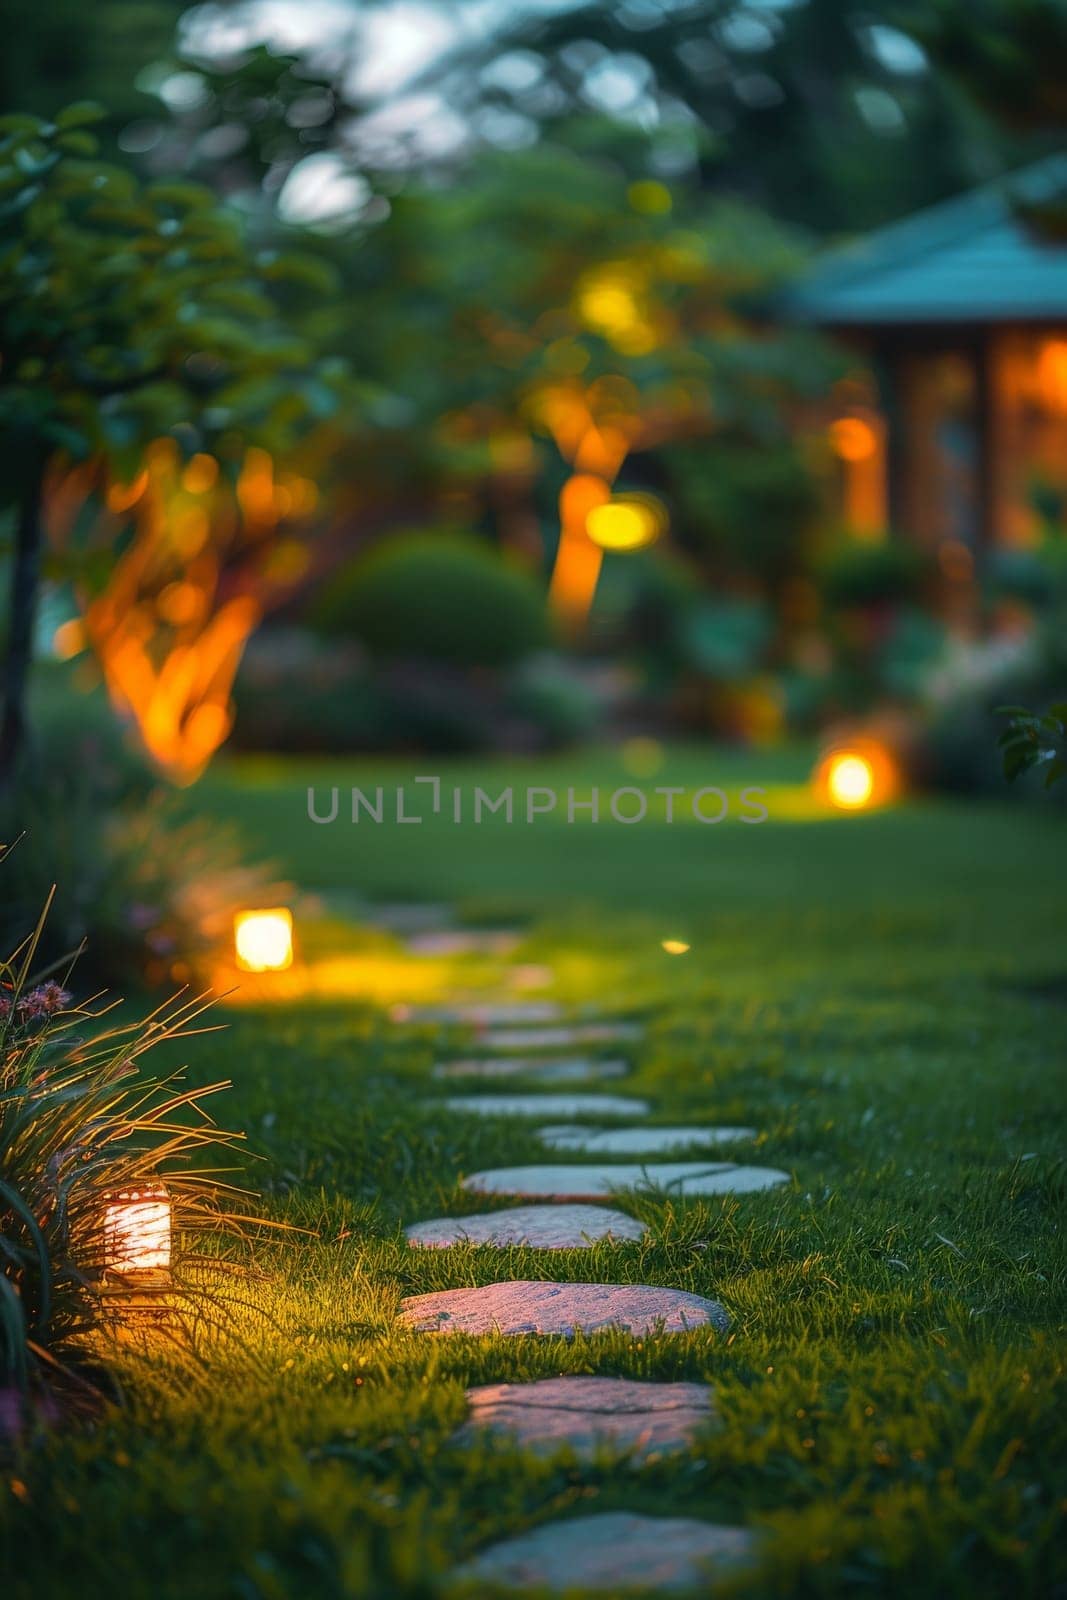 A path in a garden with lit candles on the ground.